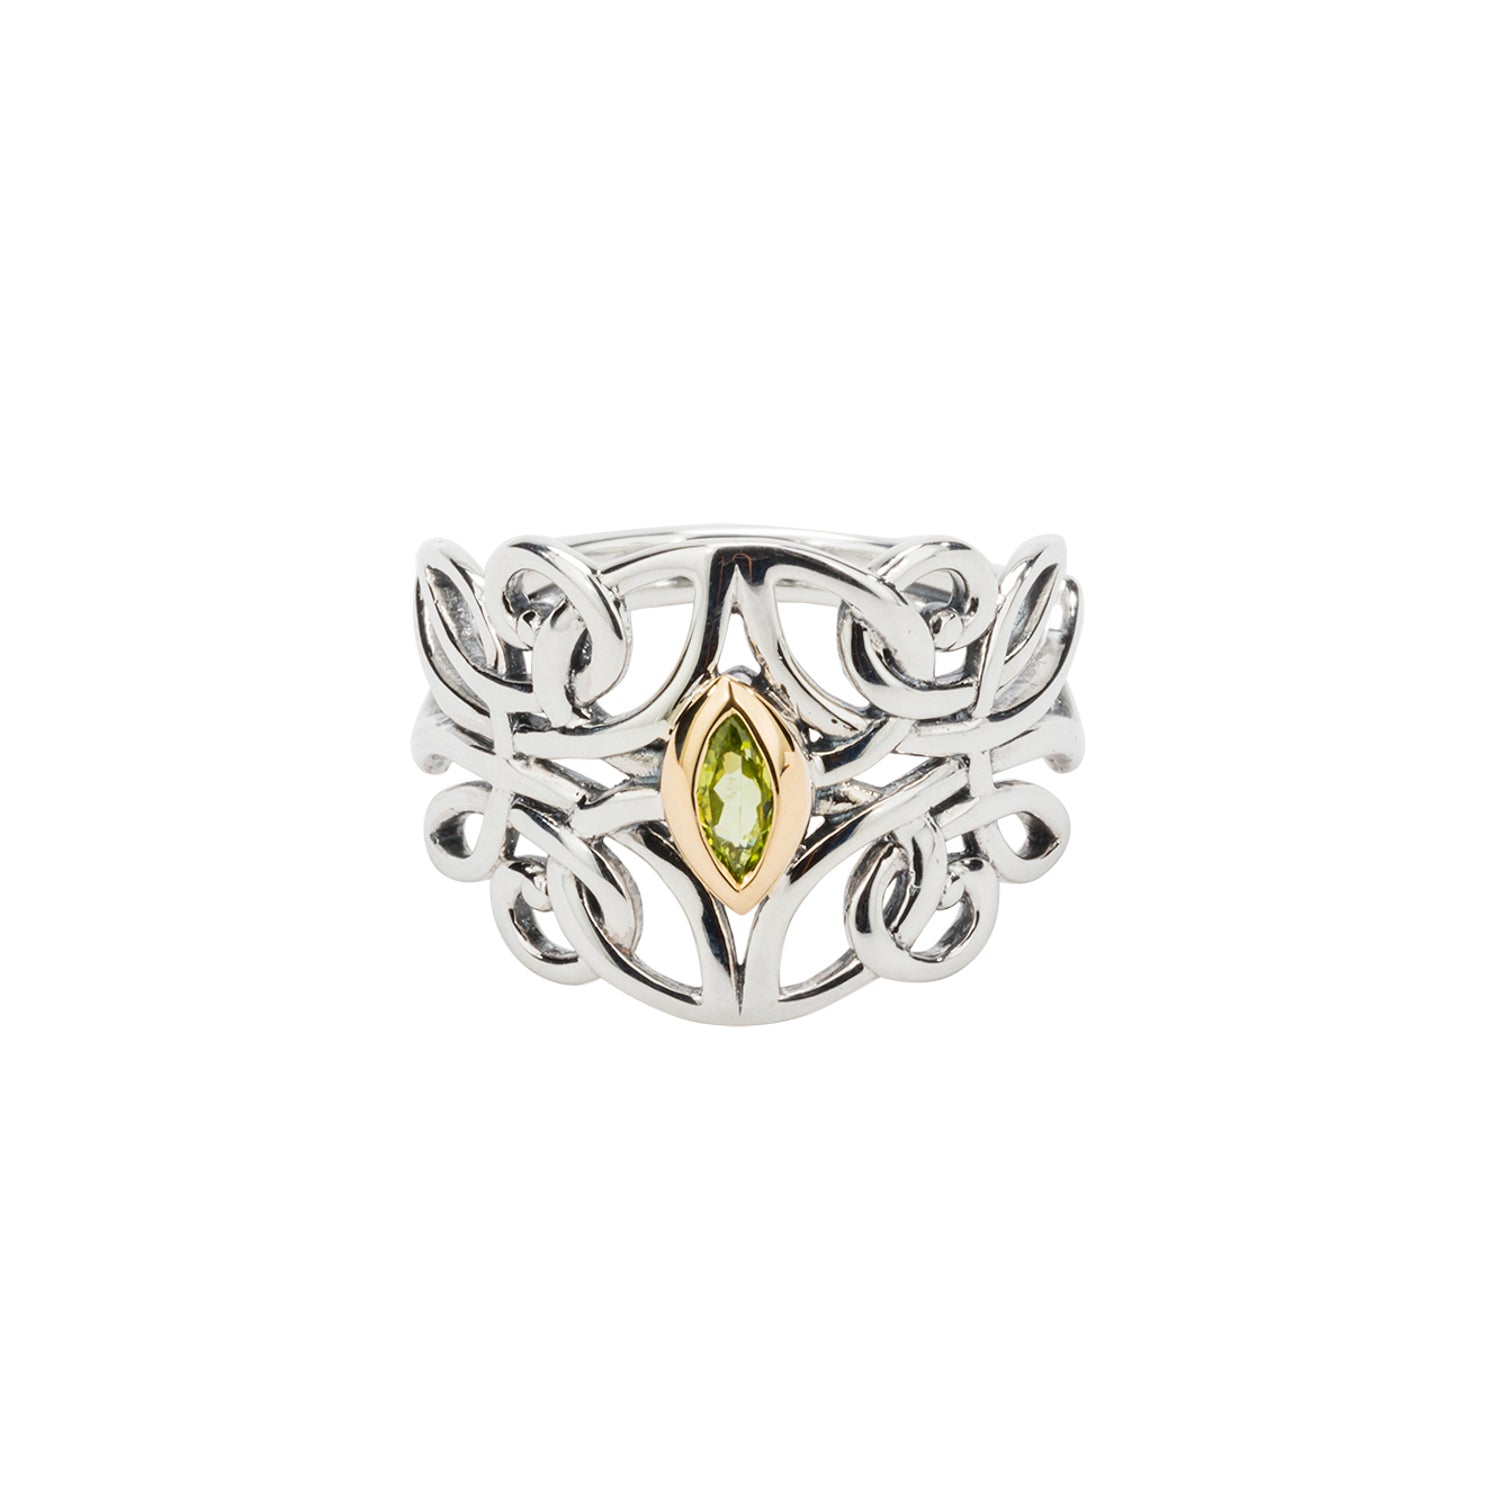 Ring Bands 10k Peridot Guardian Angel Ring from welch and company jewelers near syracuse ny 